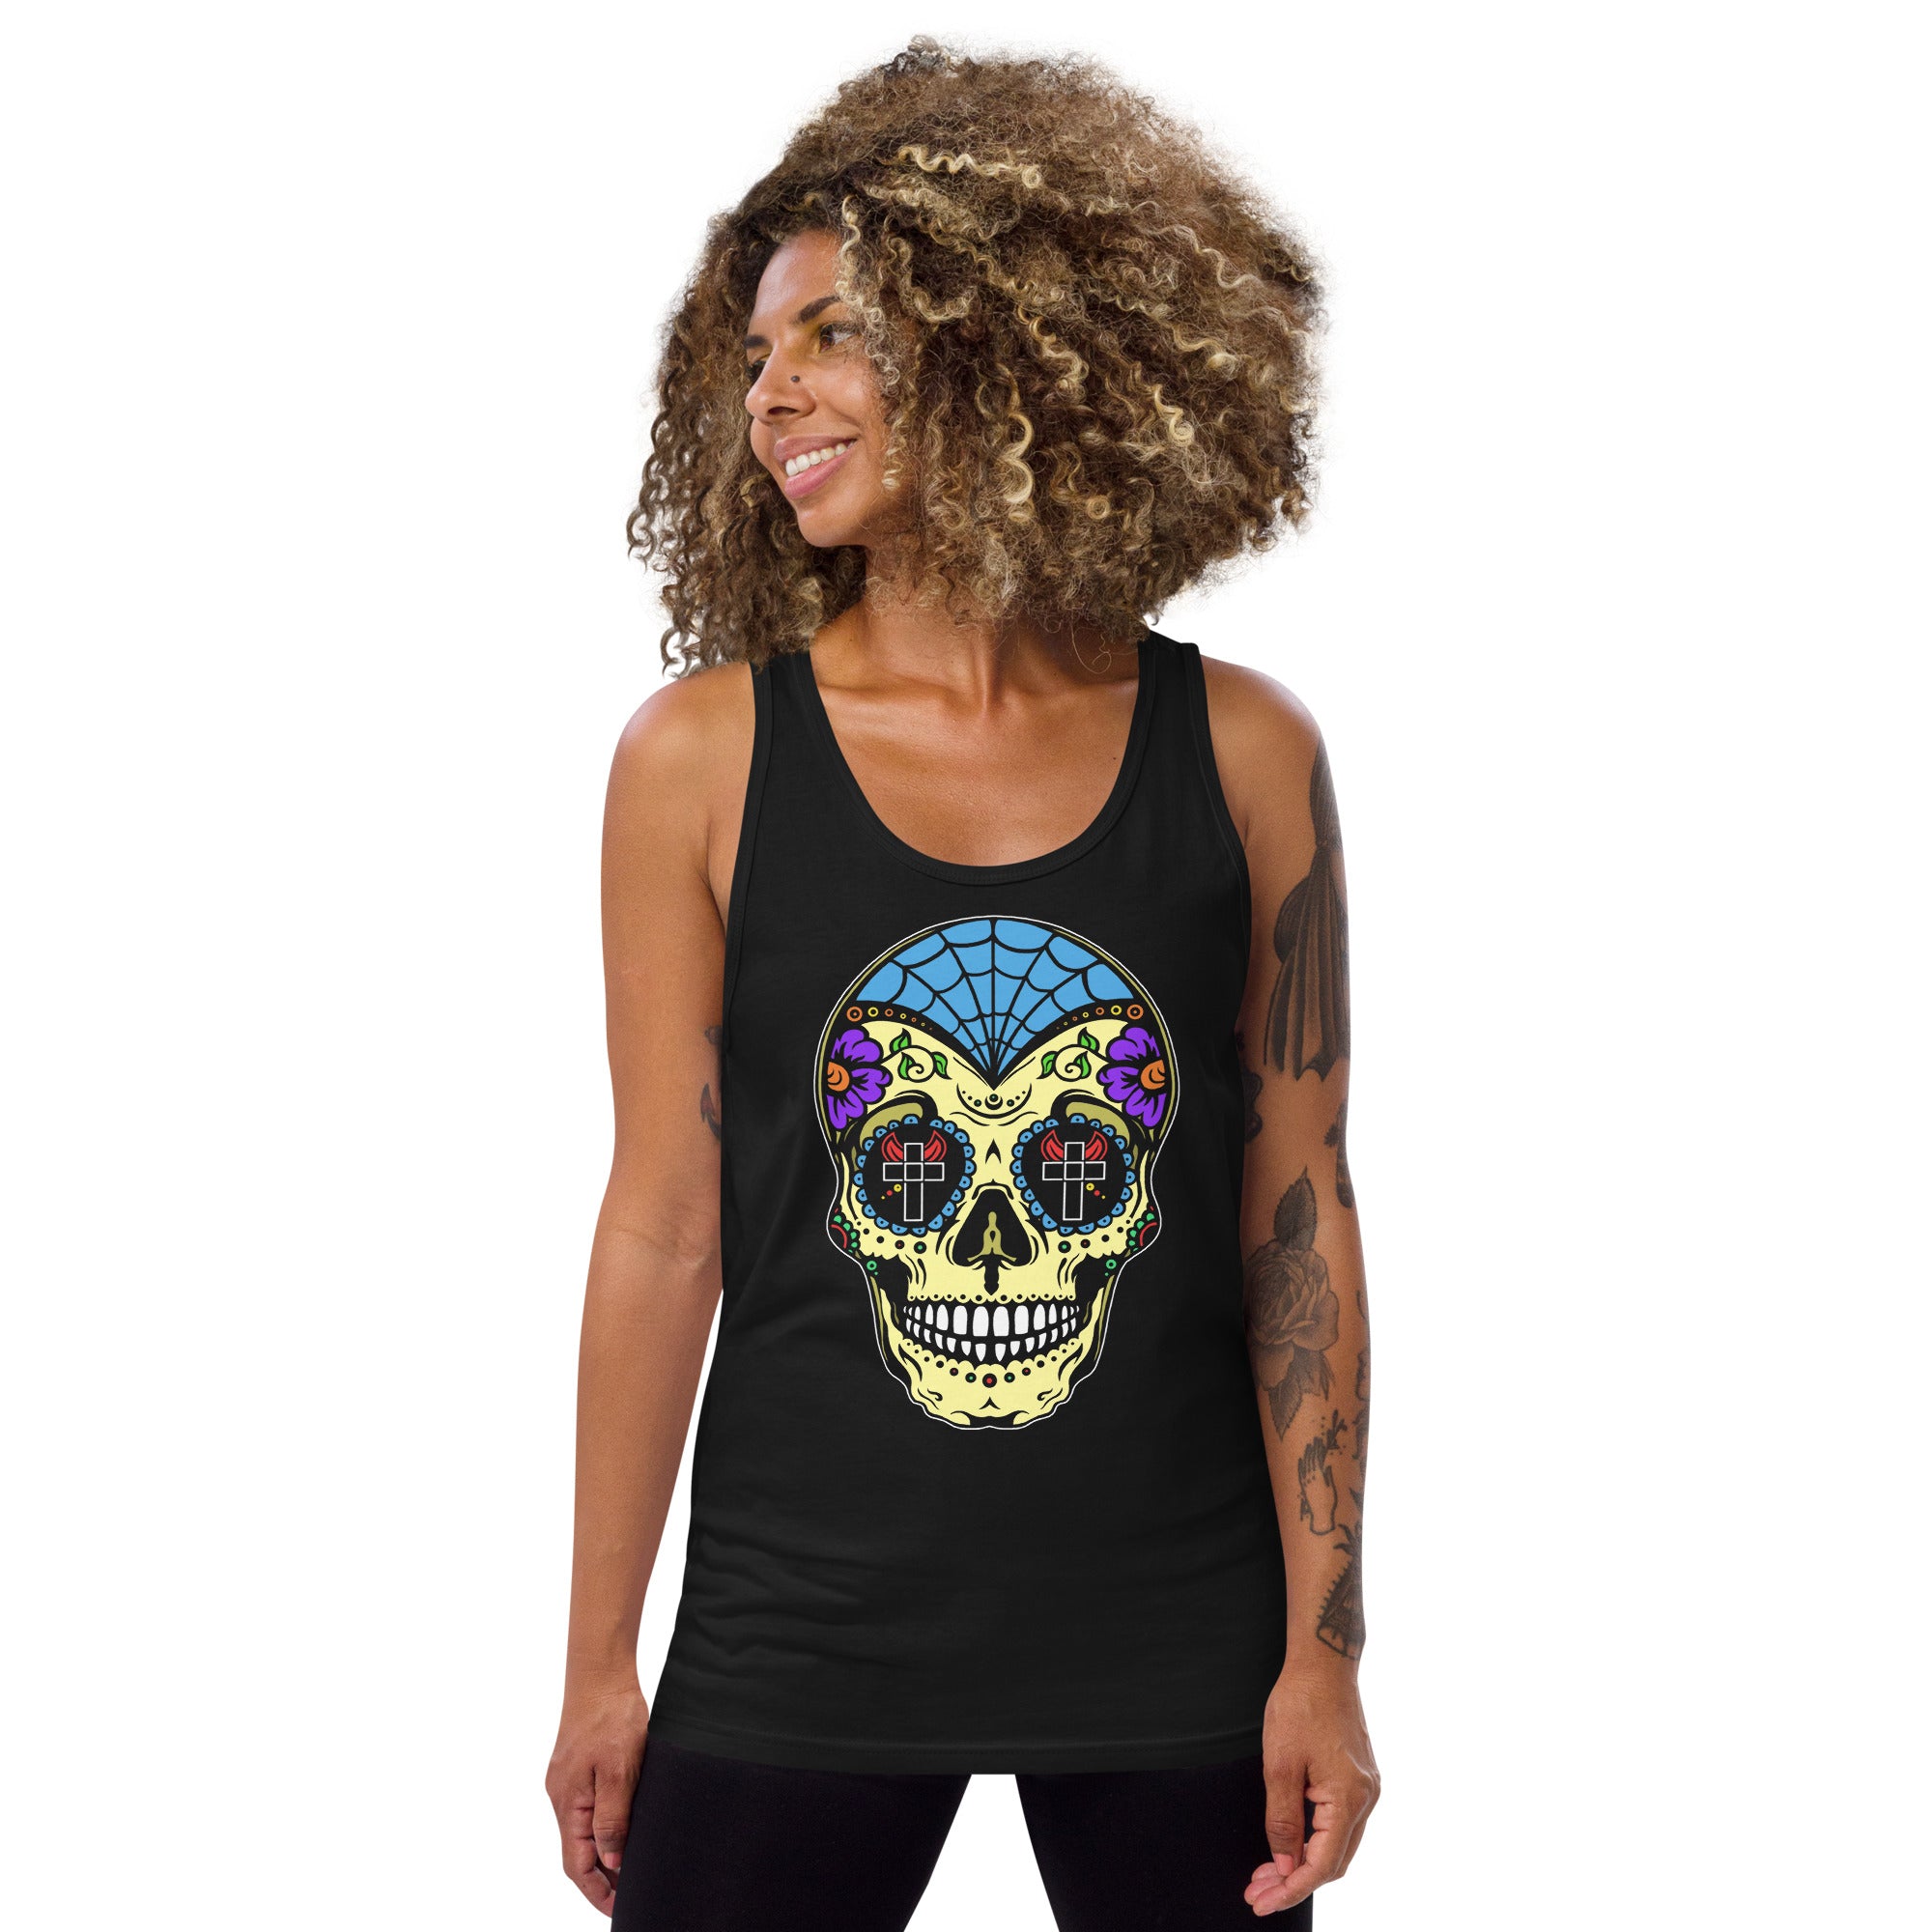 Colorful Sugar Skull Day of the Dead Halloween Men's Tank Top Shirt - Edge of Life Designs